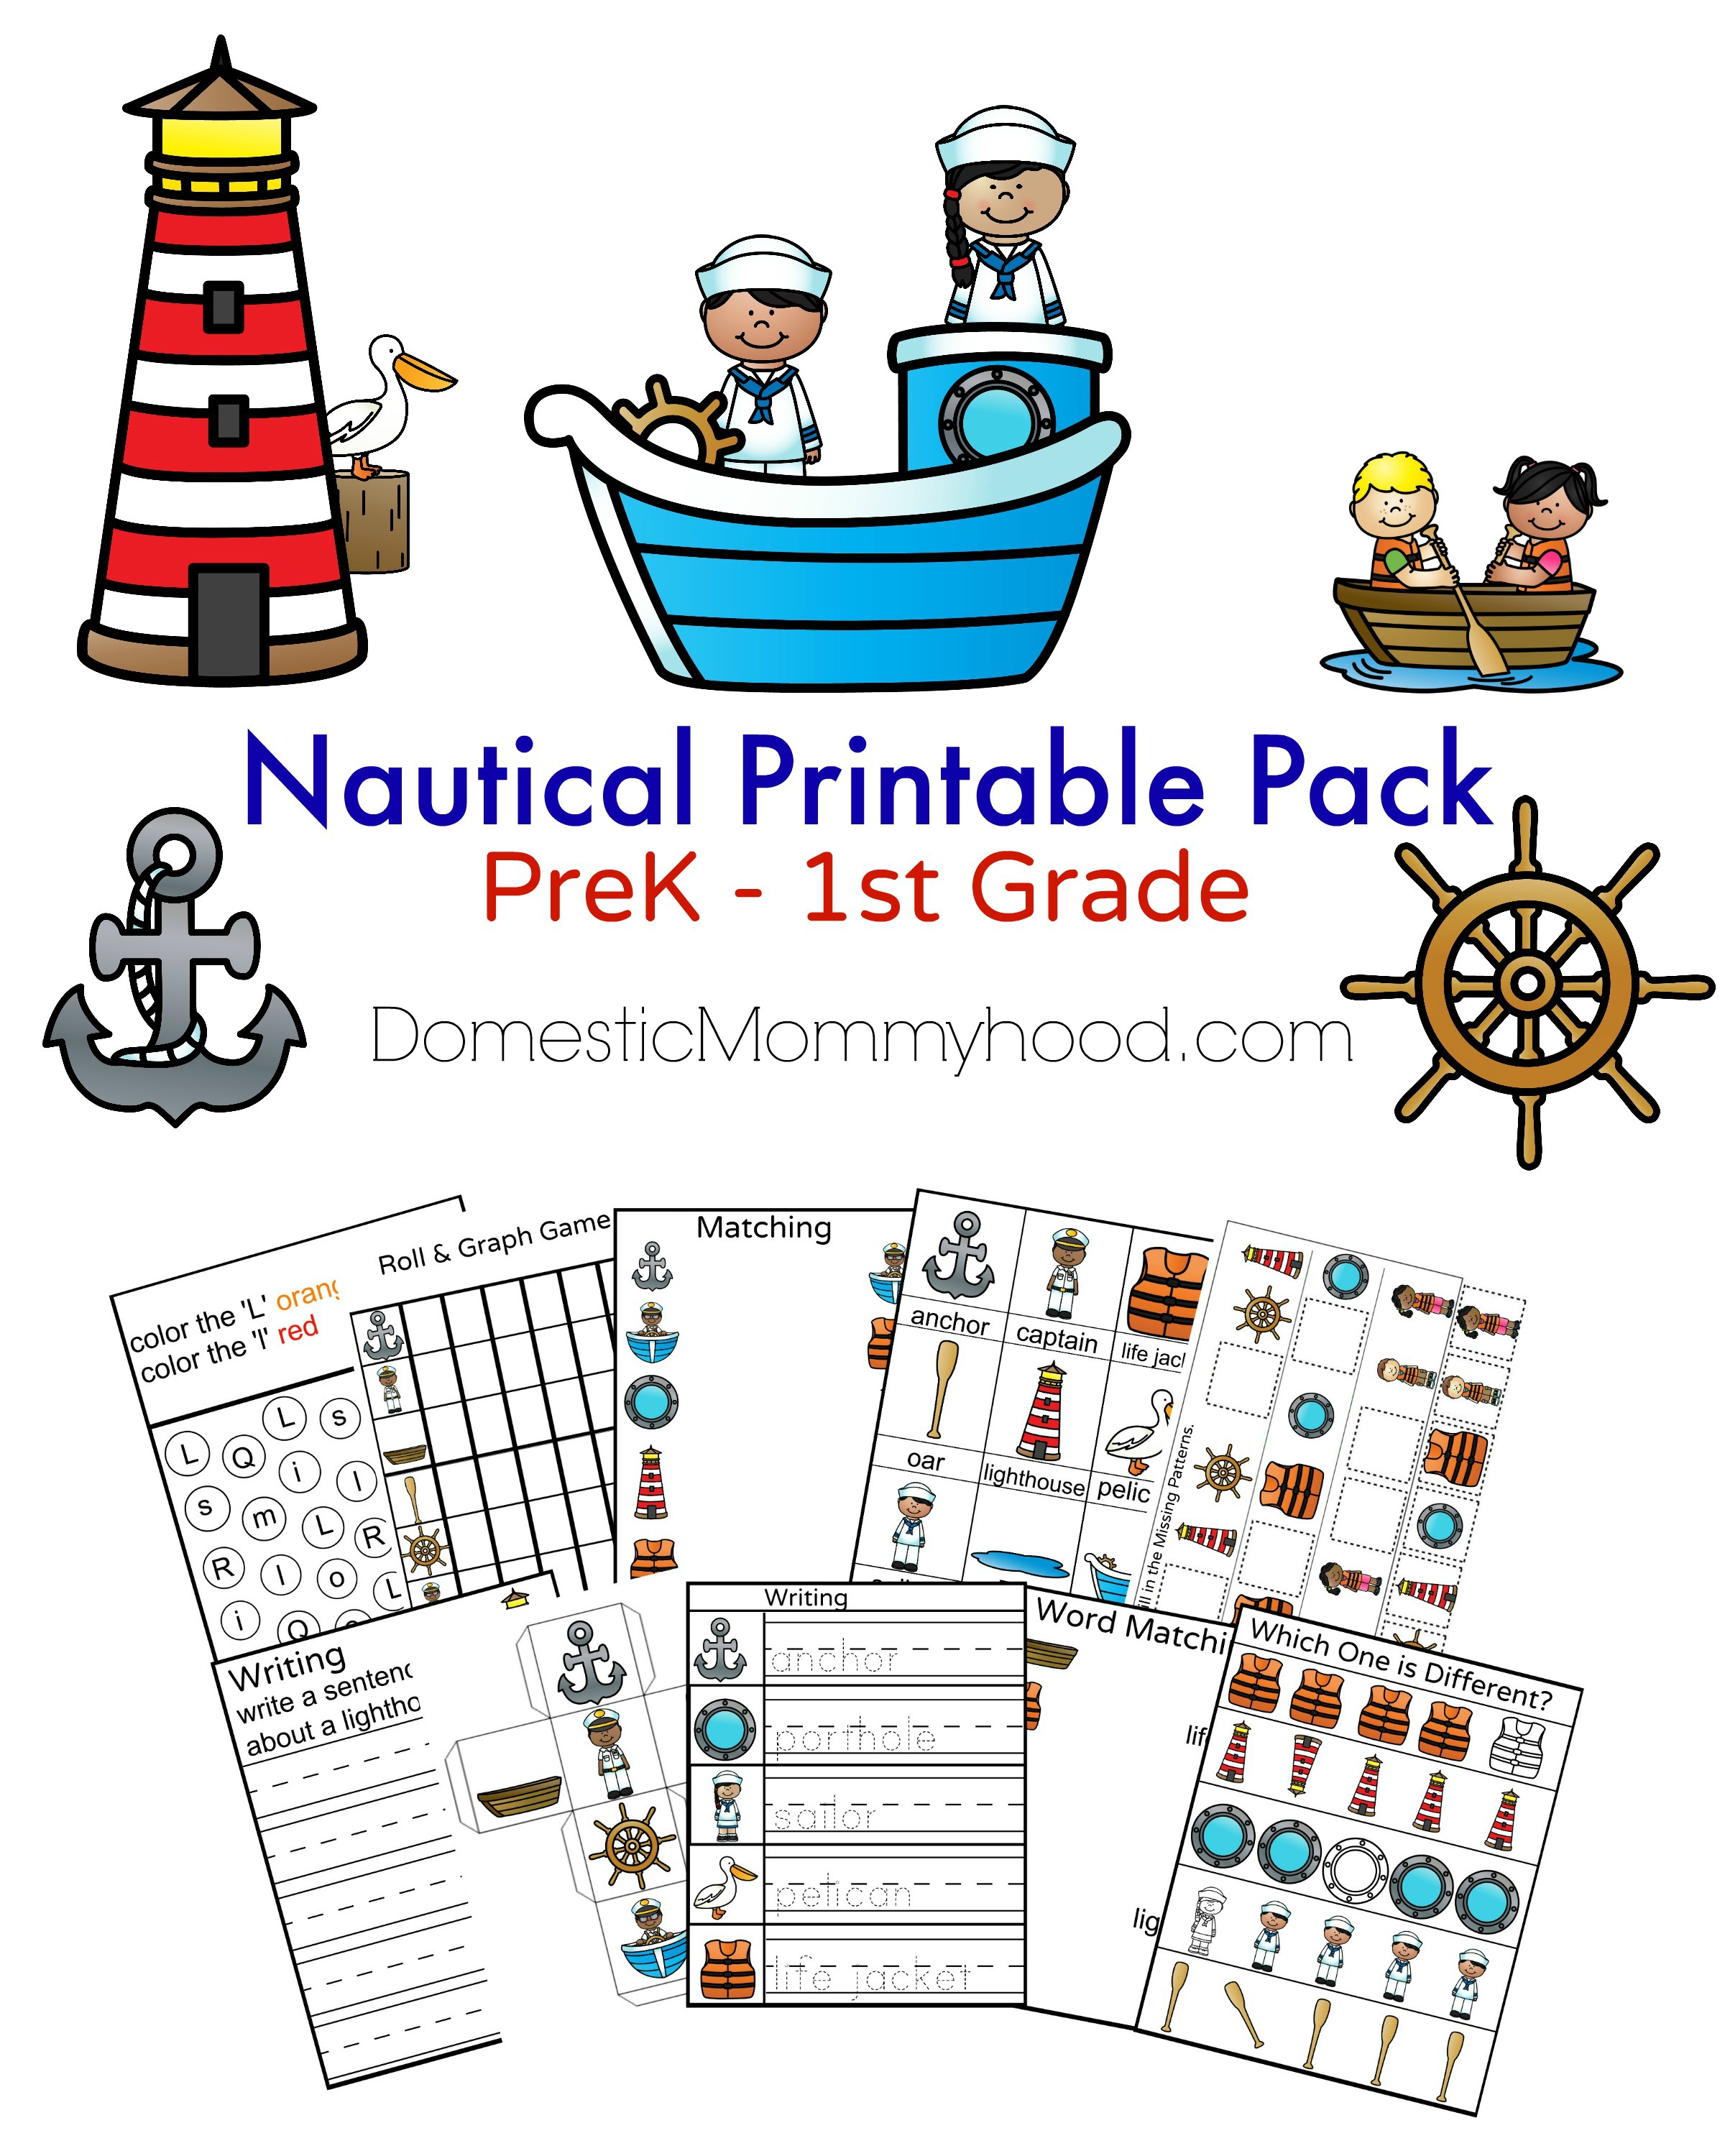 Nautical Printable Pack Cover DomesticMommyhood.com